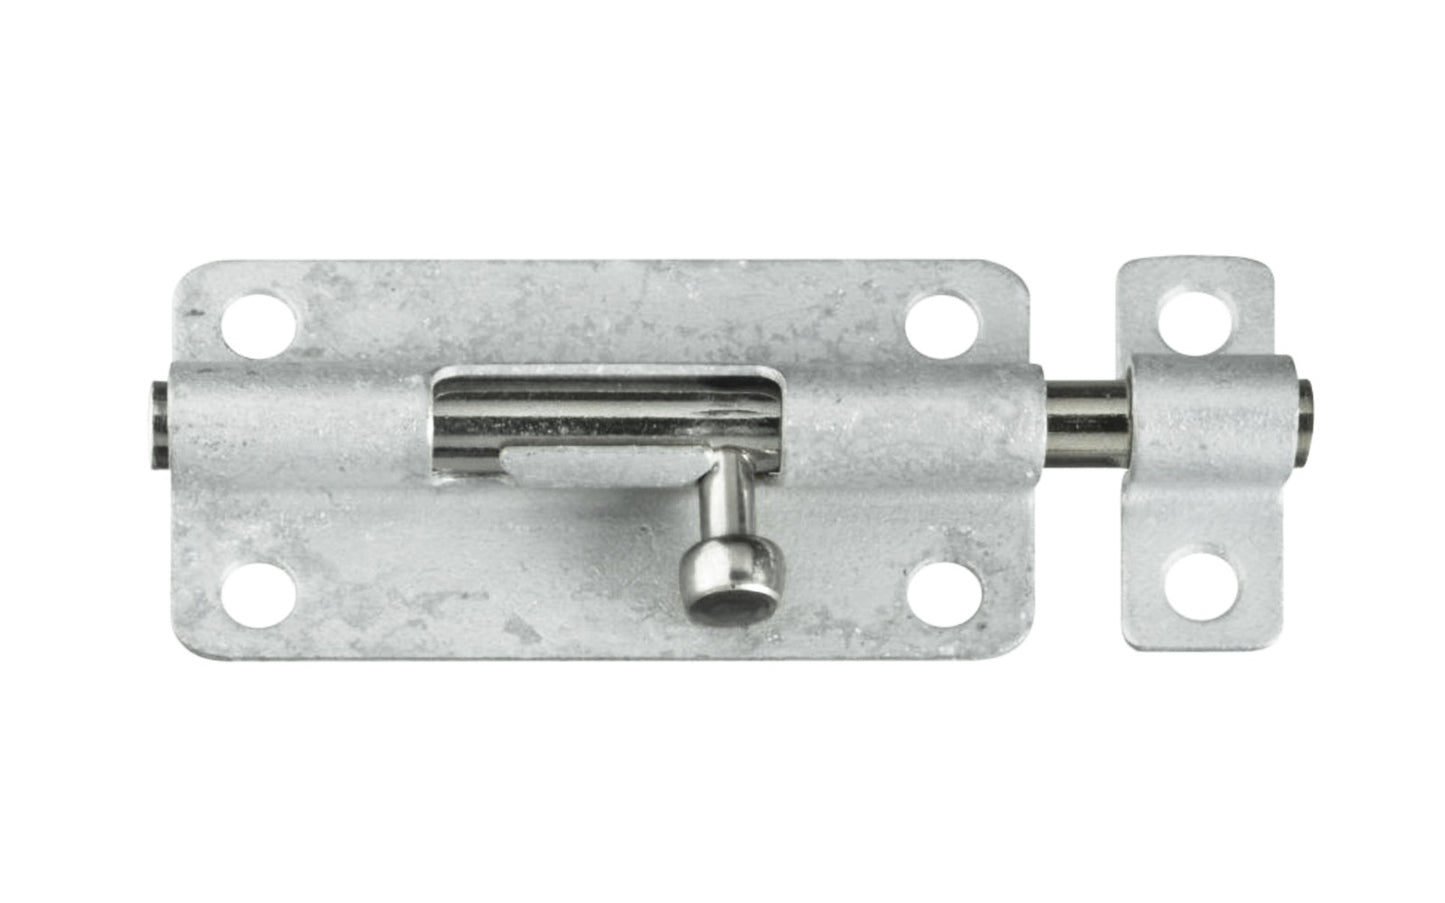 4" Galvanized Barrel Bolt is designed for security applications on lightweight doors, chests, & cabinets. Use on vertical, horizontal, left or right hand applications. Coated to withstand harsh weather conditions & prevent corrosion. 4" width x 1-1/2" height. National Hardware Model No. N151-894. 038613151895